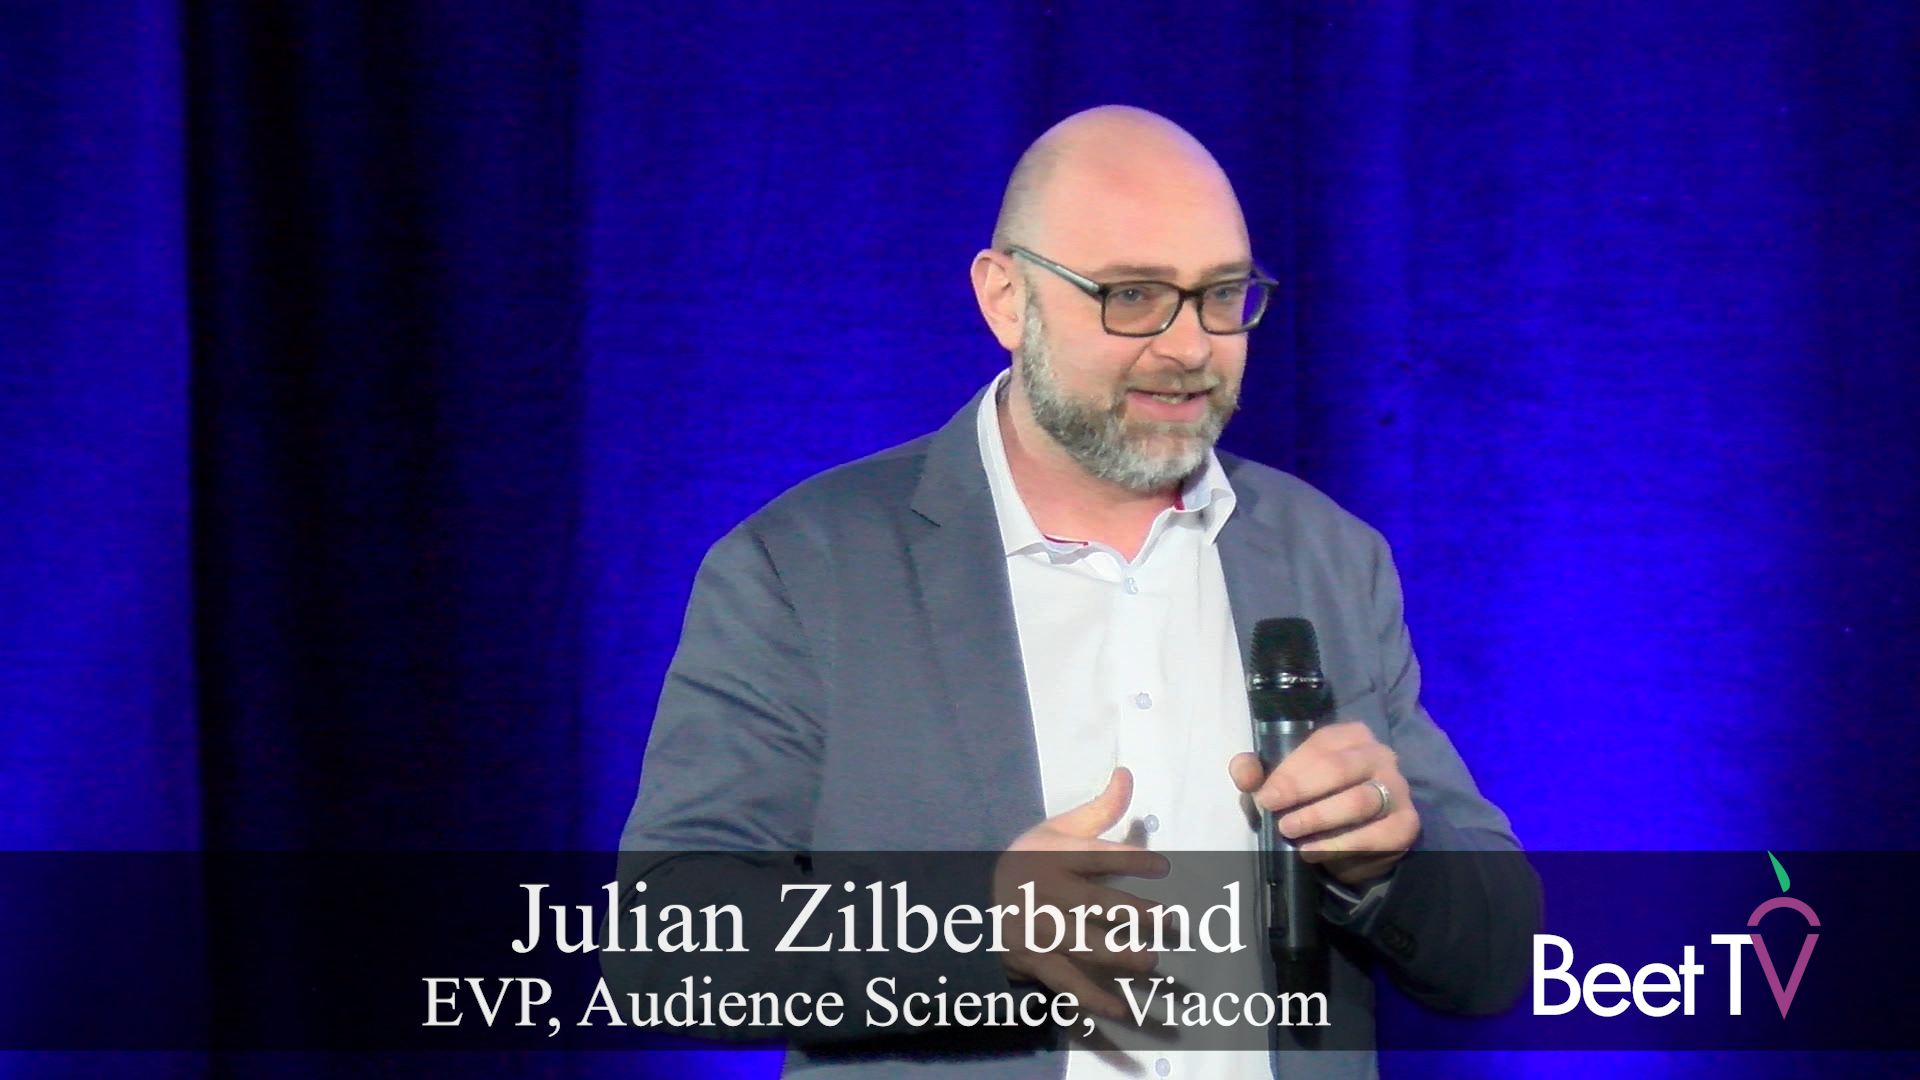 Many Roads To Buy: Viacom’s Zilberbrand On Marketplaces & More